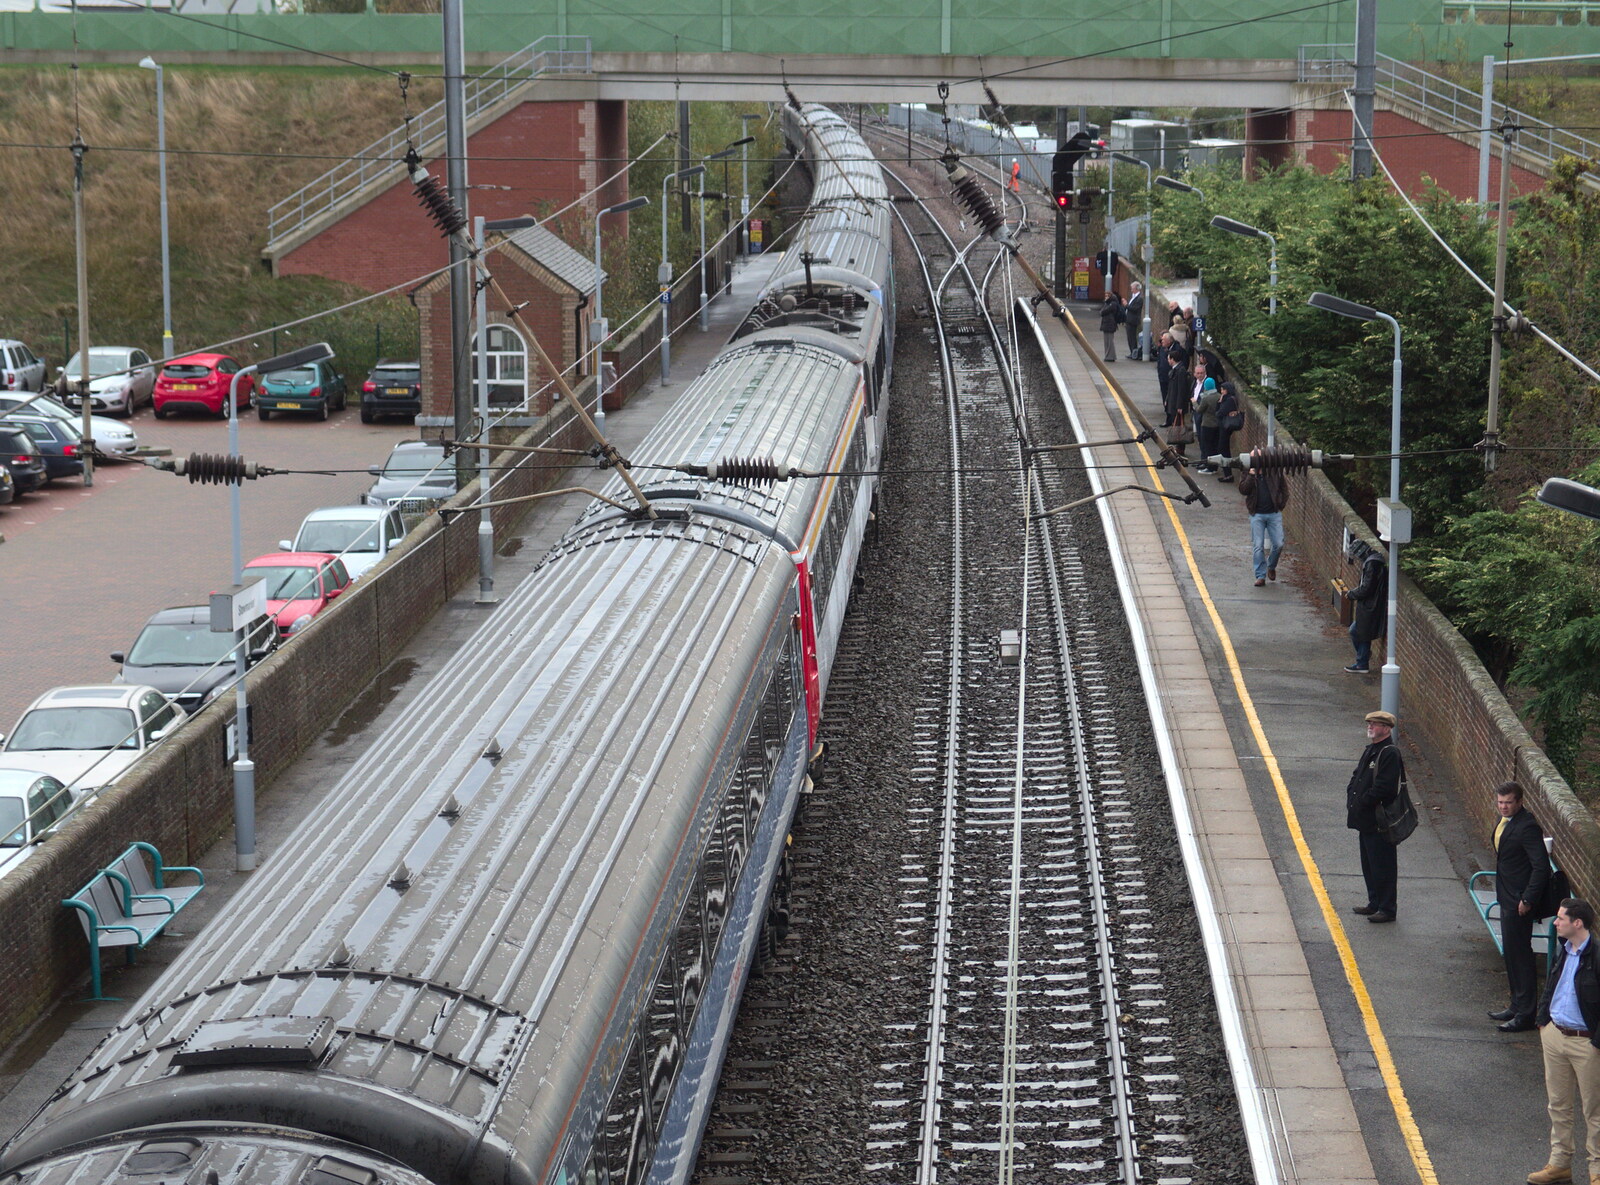 The massive train at Stowmarket from (Very) Long Train (Not) Running, Stowmarket, Suffolk - 21st October 2014